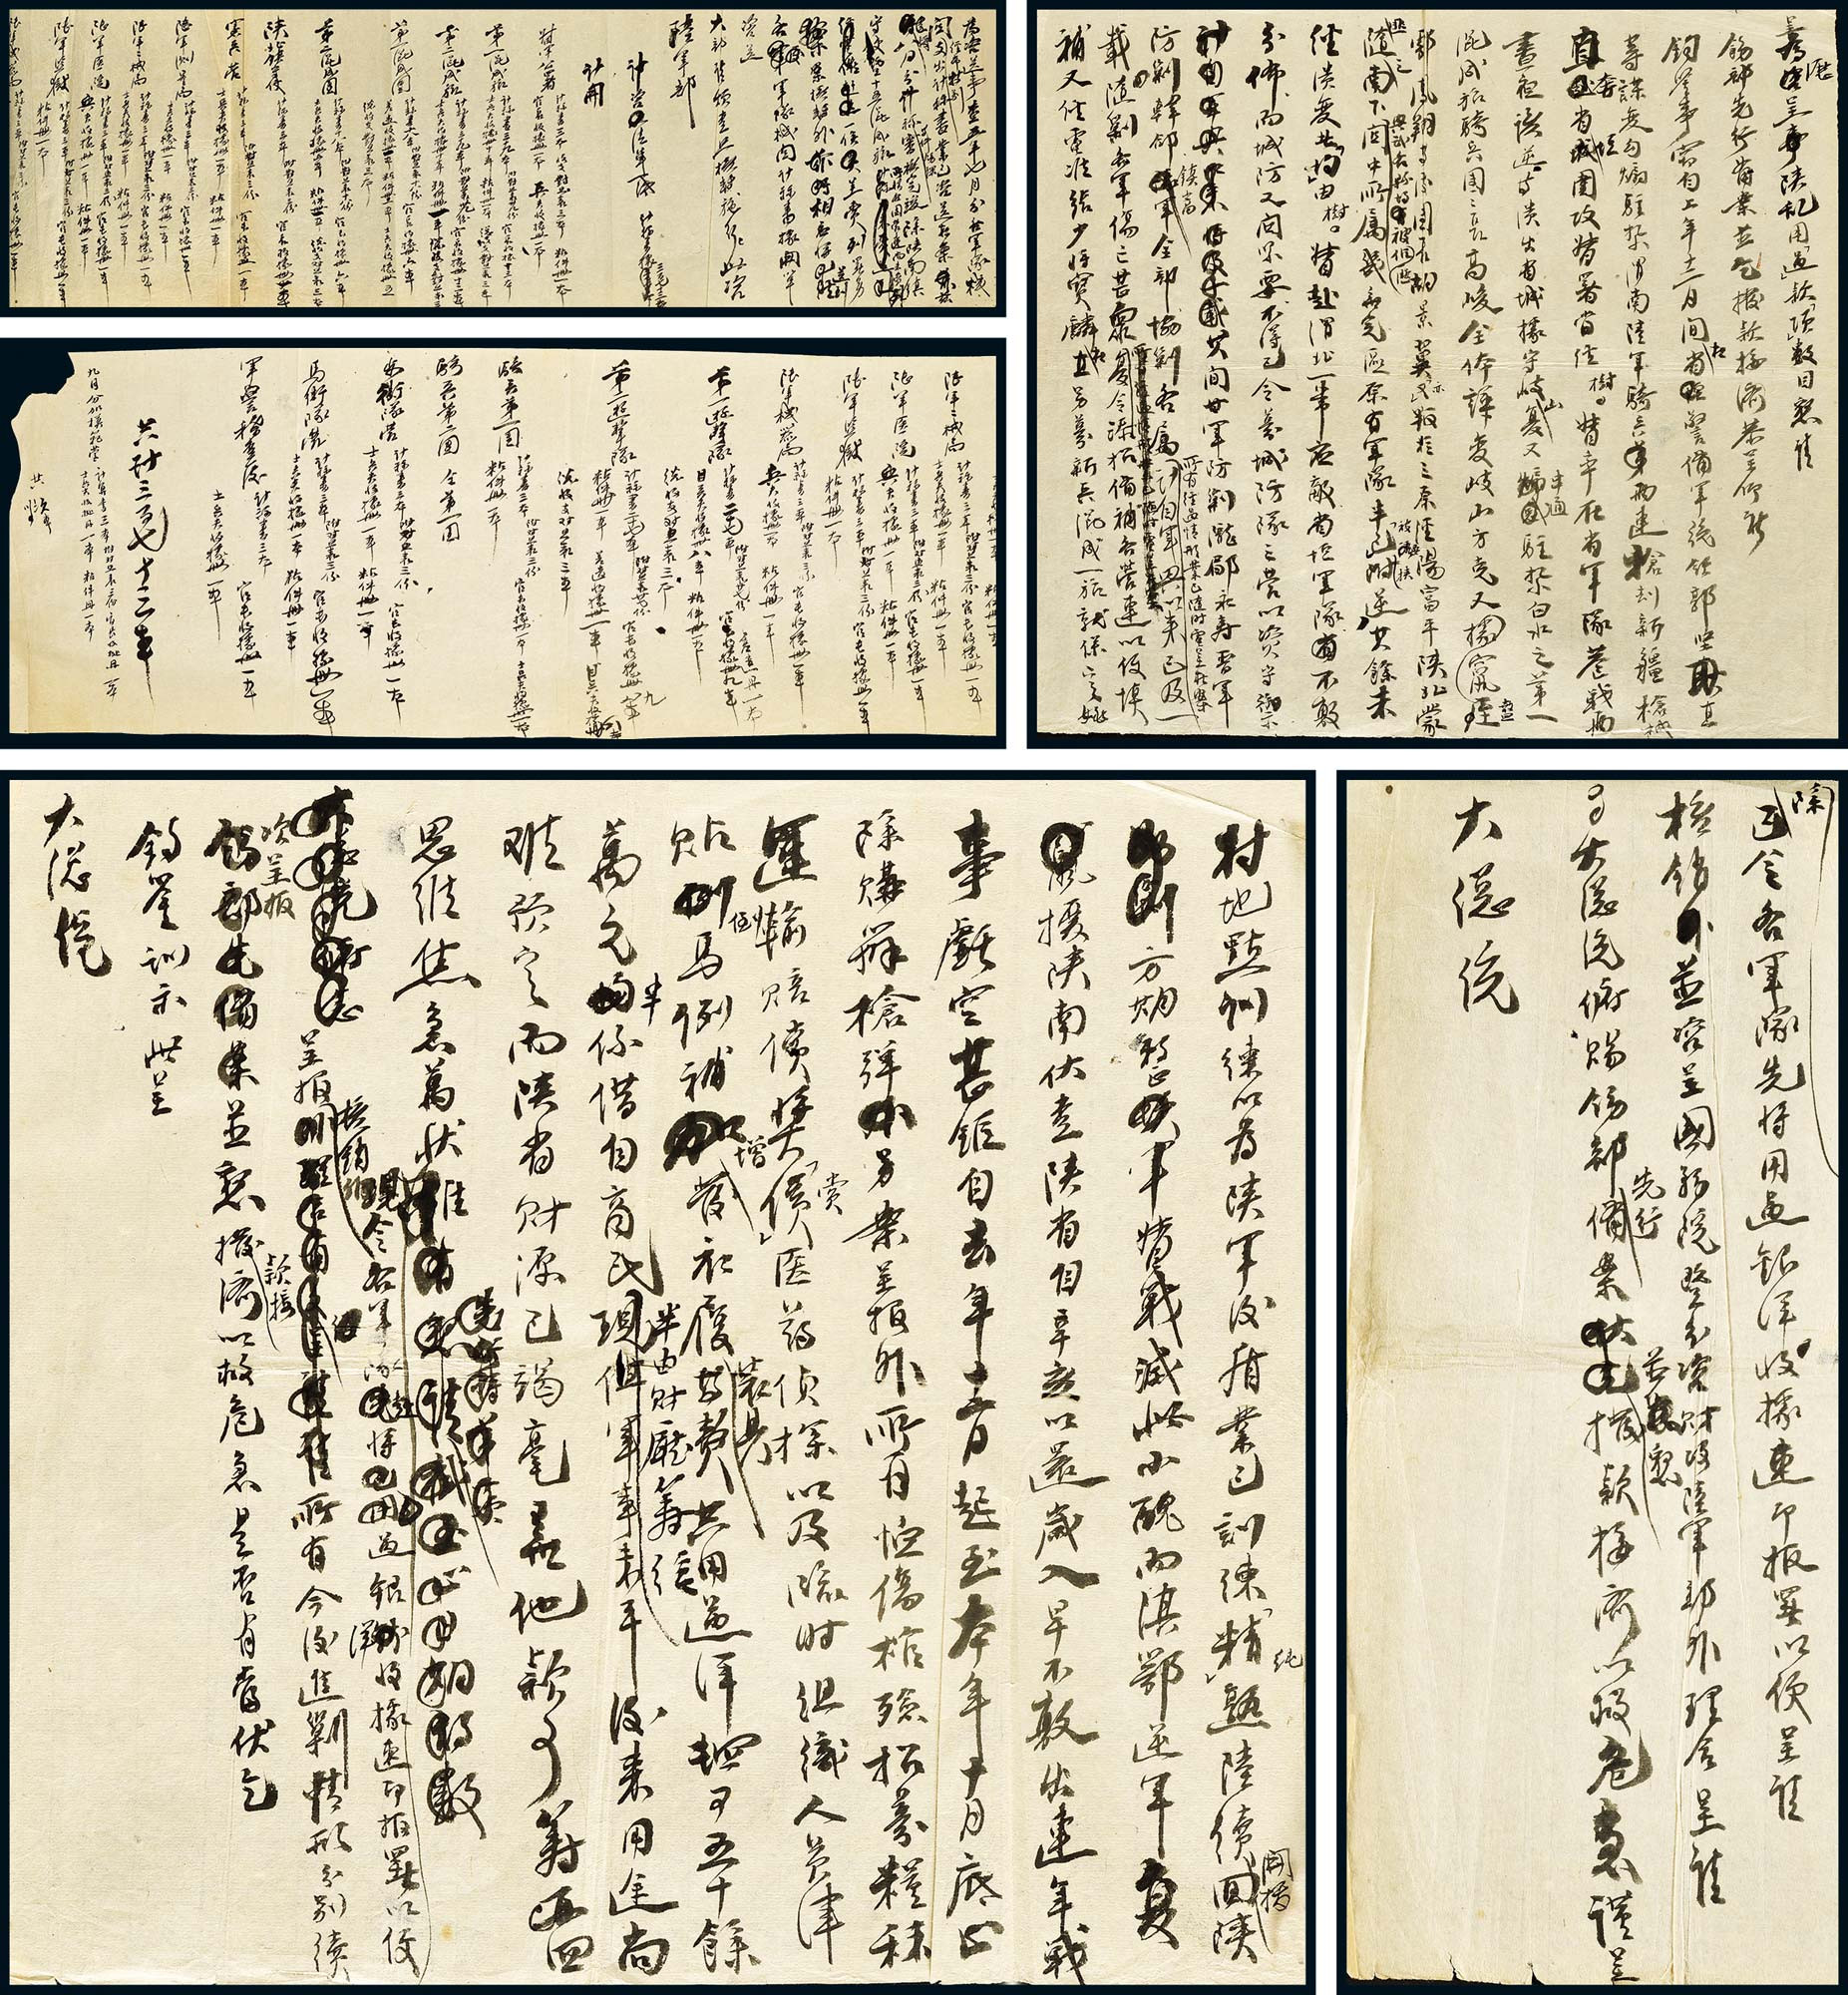 Draft about rebellion-suppressing cost instructed by President Li Yuan-hung